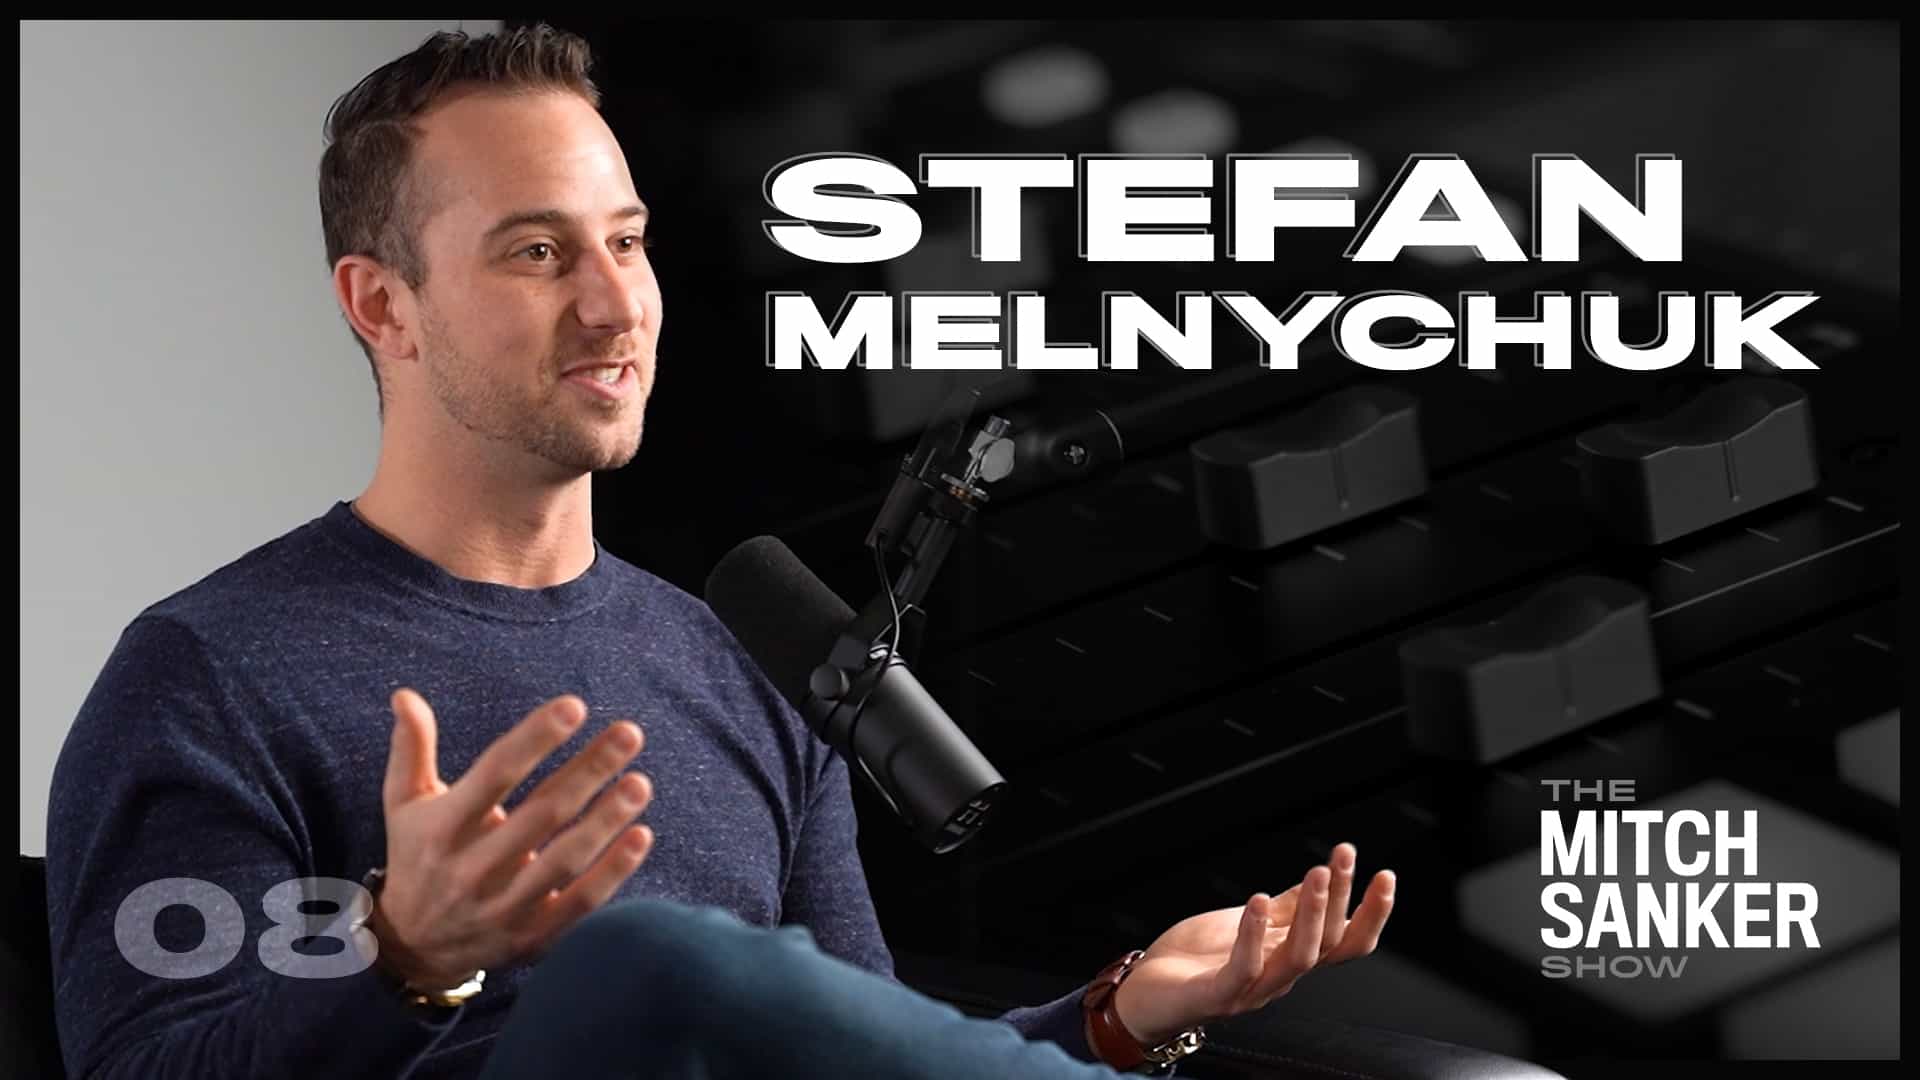 Read more about the article The Mitch Sanker Show – Episode 08 featuring Stefan Melnychuk